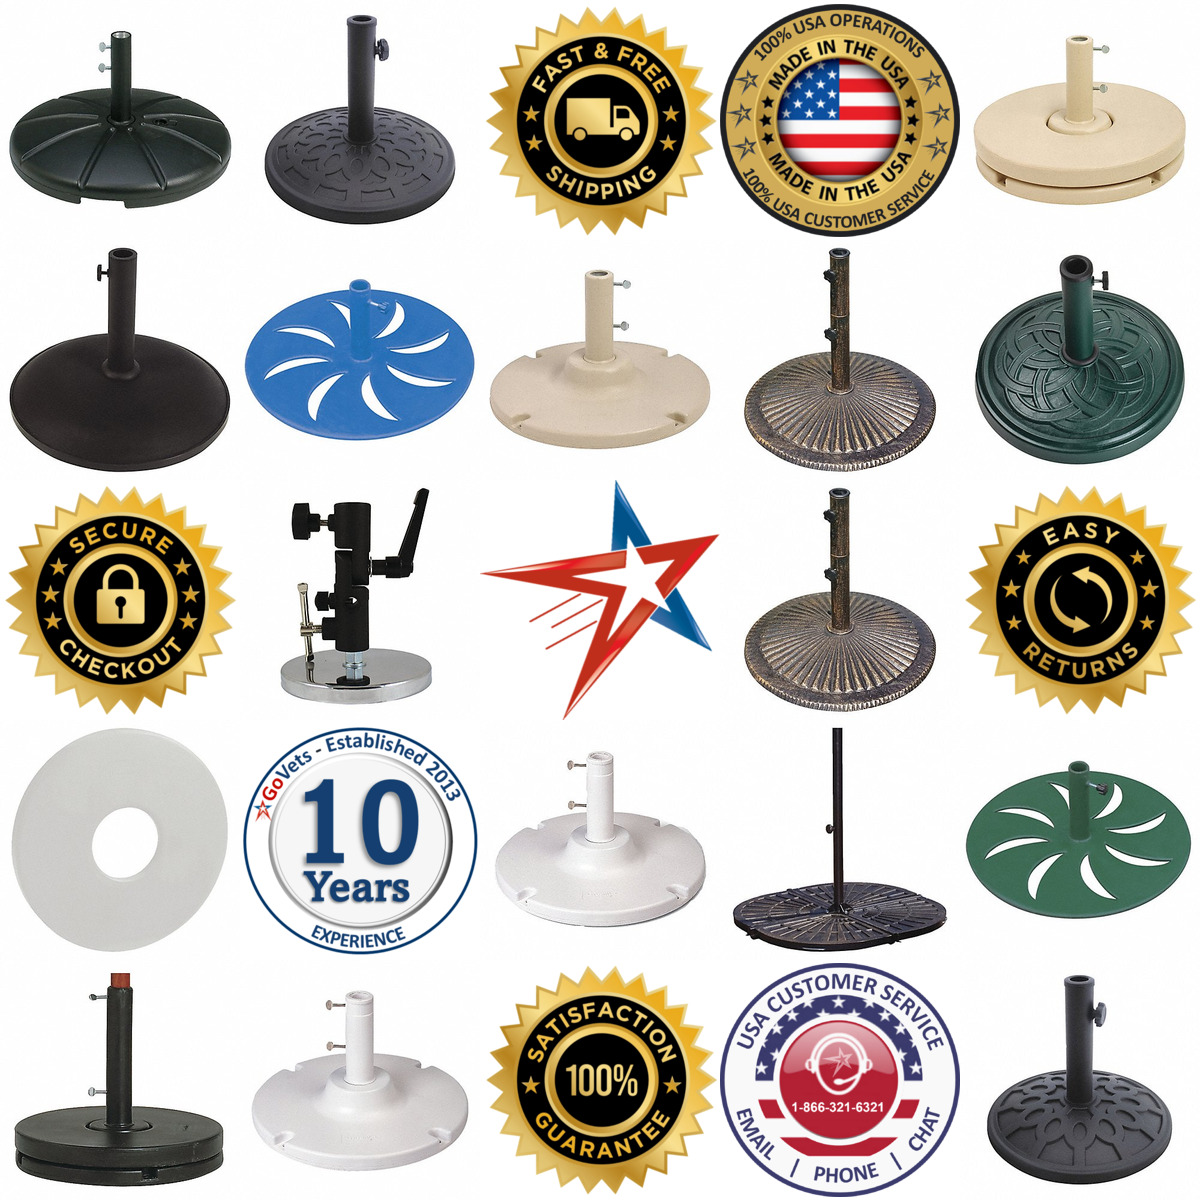 A selection of Patio Umbrella Bases products on GoVets